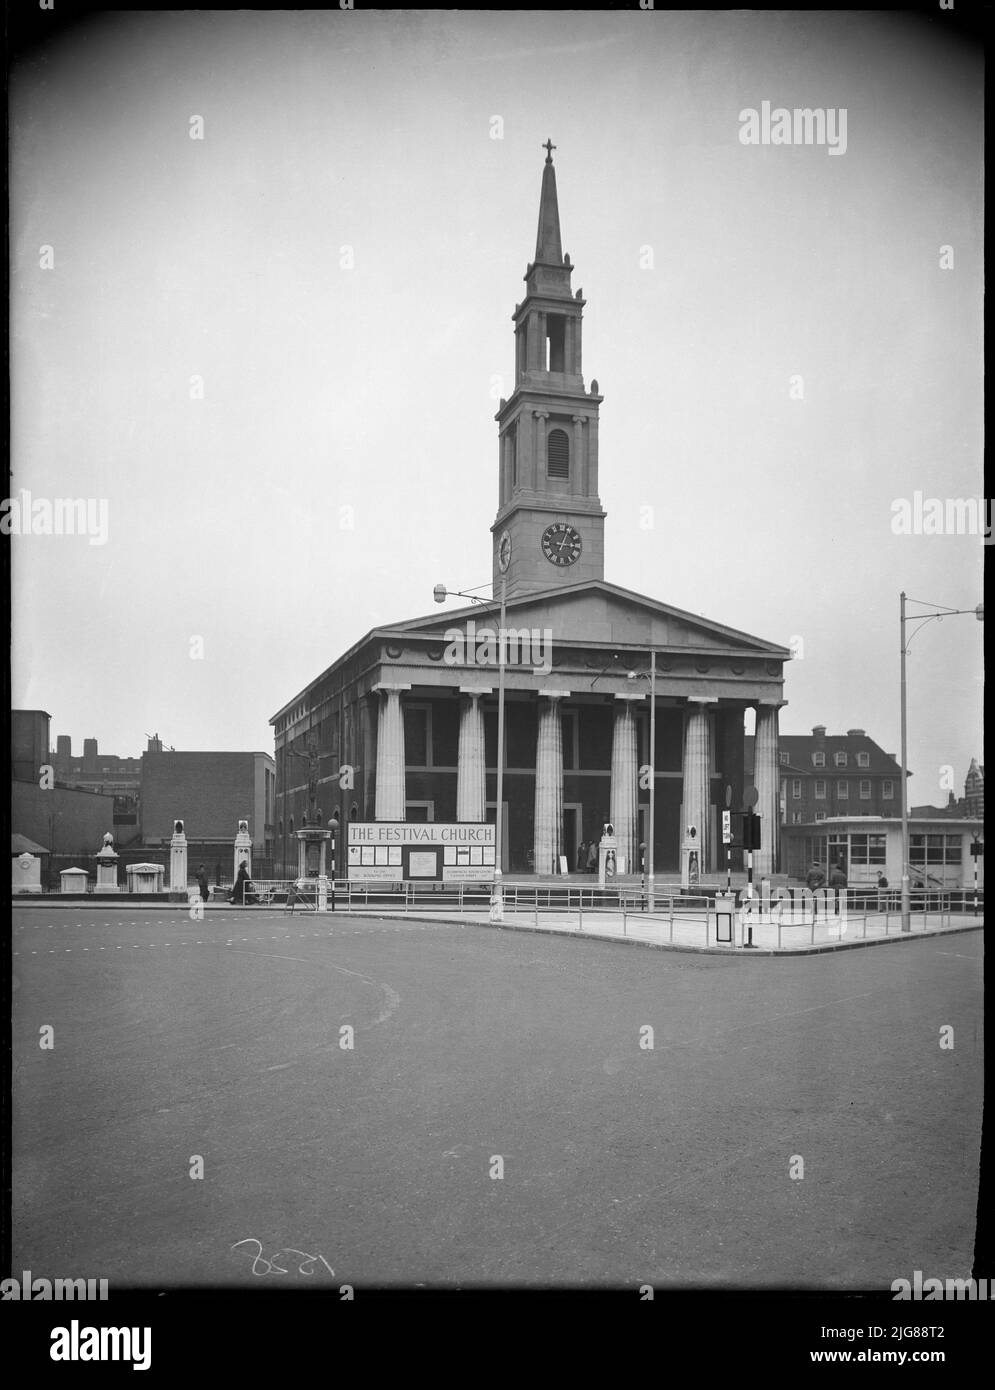 St John's Church, Waterloo Road, Lambeth, Greater London Authority, 1951. Exterior view from the south-west showing the west elevation of St John's Church, showing the building post-restoration following bomb damage during the Second World War. St John's Church was originally built in 1823-4 to designs by the architect Francis Bedford. It was one of four churches built in Lambeth in the Greek Revival style. The church was damaged by bombs during the Second World War. It was later restored and designated as the Festival of Britain church in 1951. This image shows the newly restored building wit Stock Photo